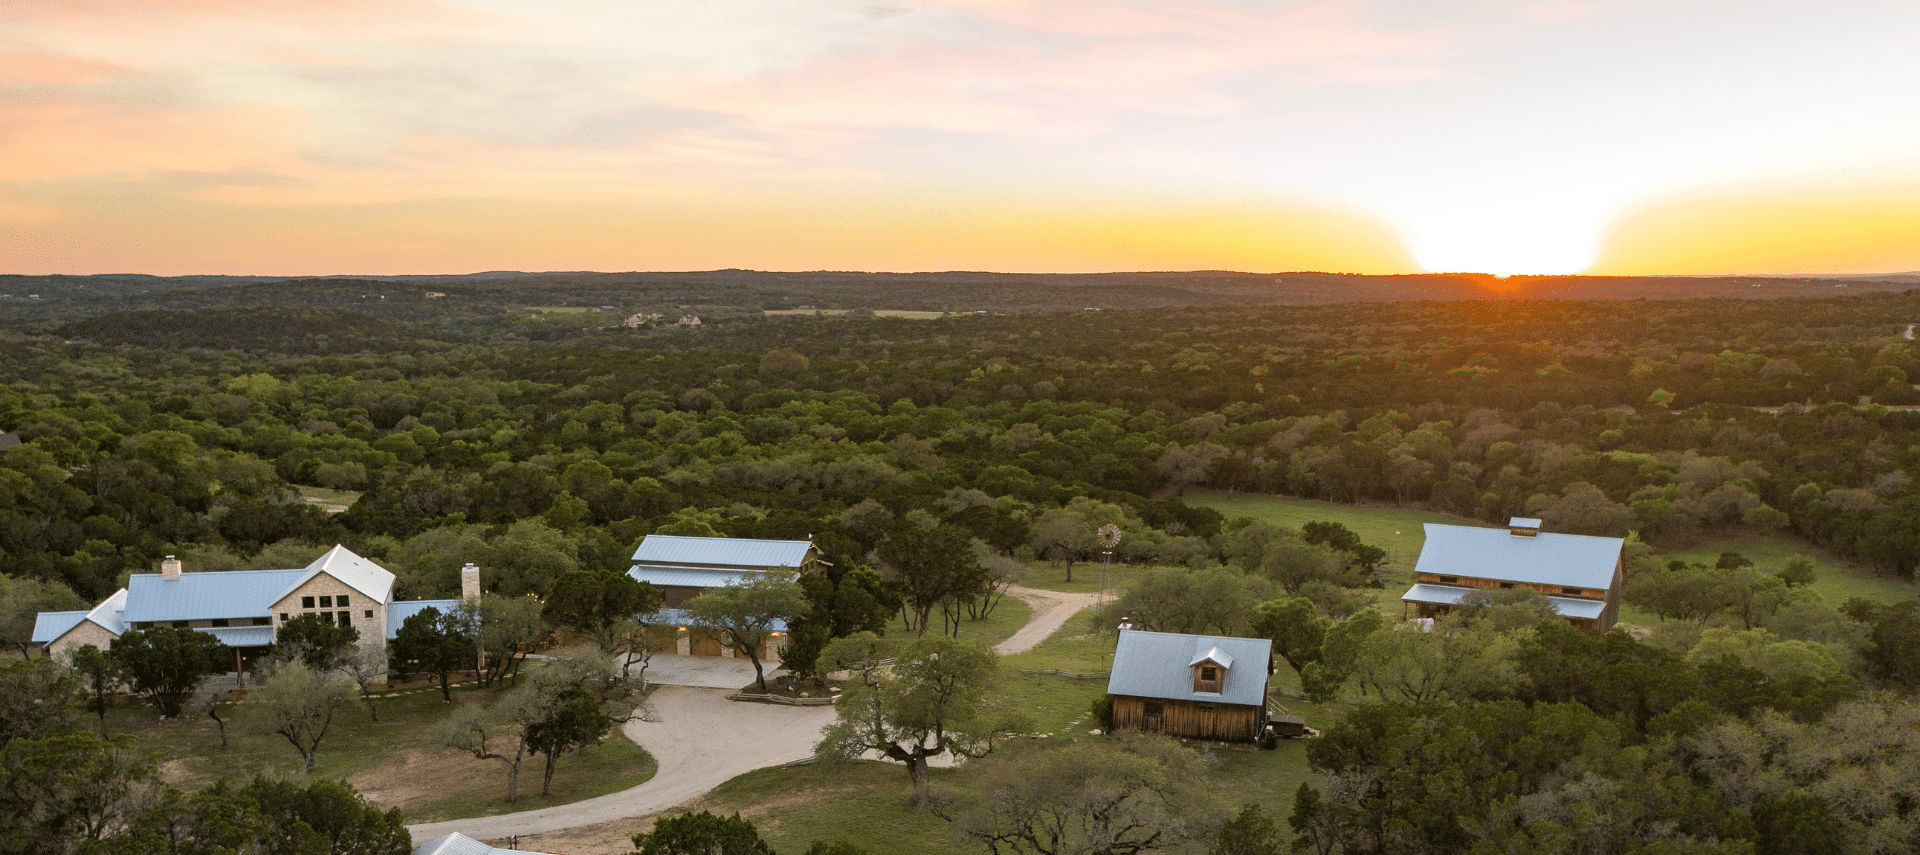 Image of 25 sprawling acres in Texas Hill Country overlooking a sunset from grounds at Inn at Sunset Mill Ranch.